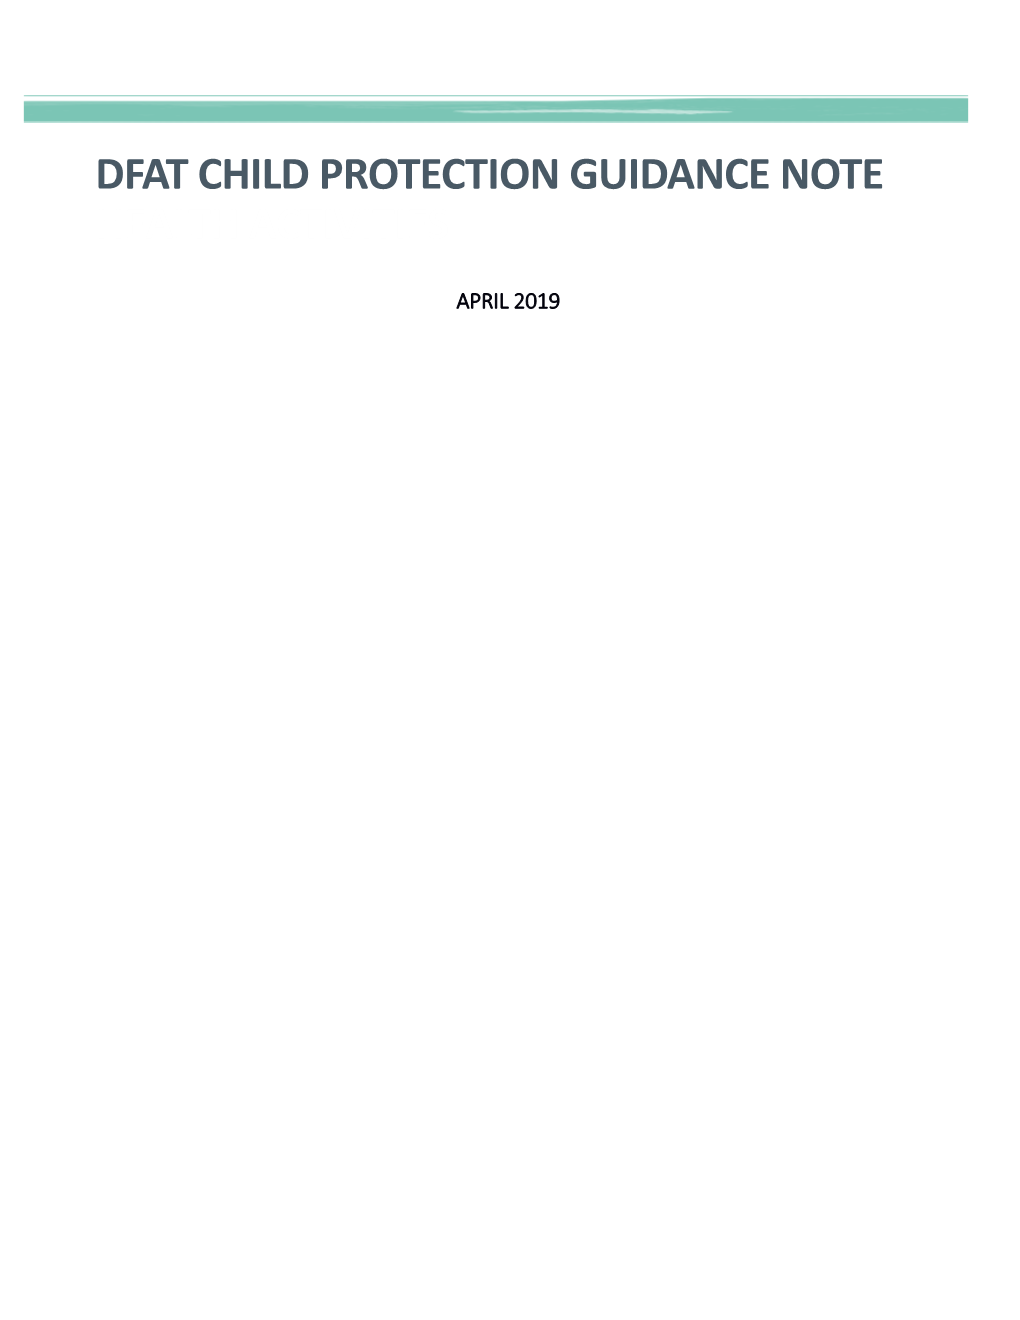 DFAT Child Protection Guidance Note Health Activities